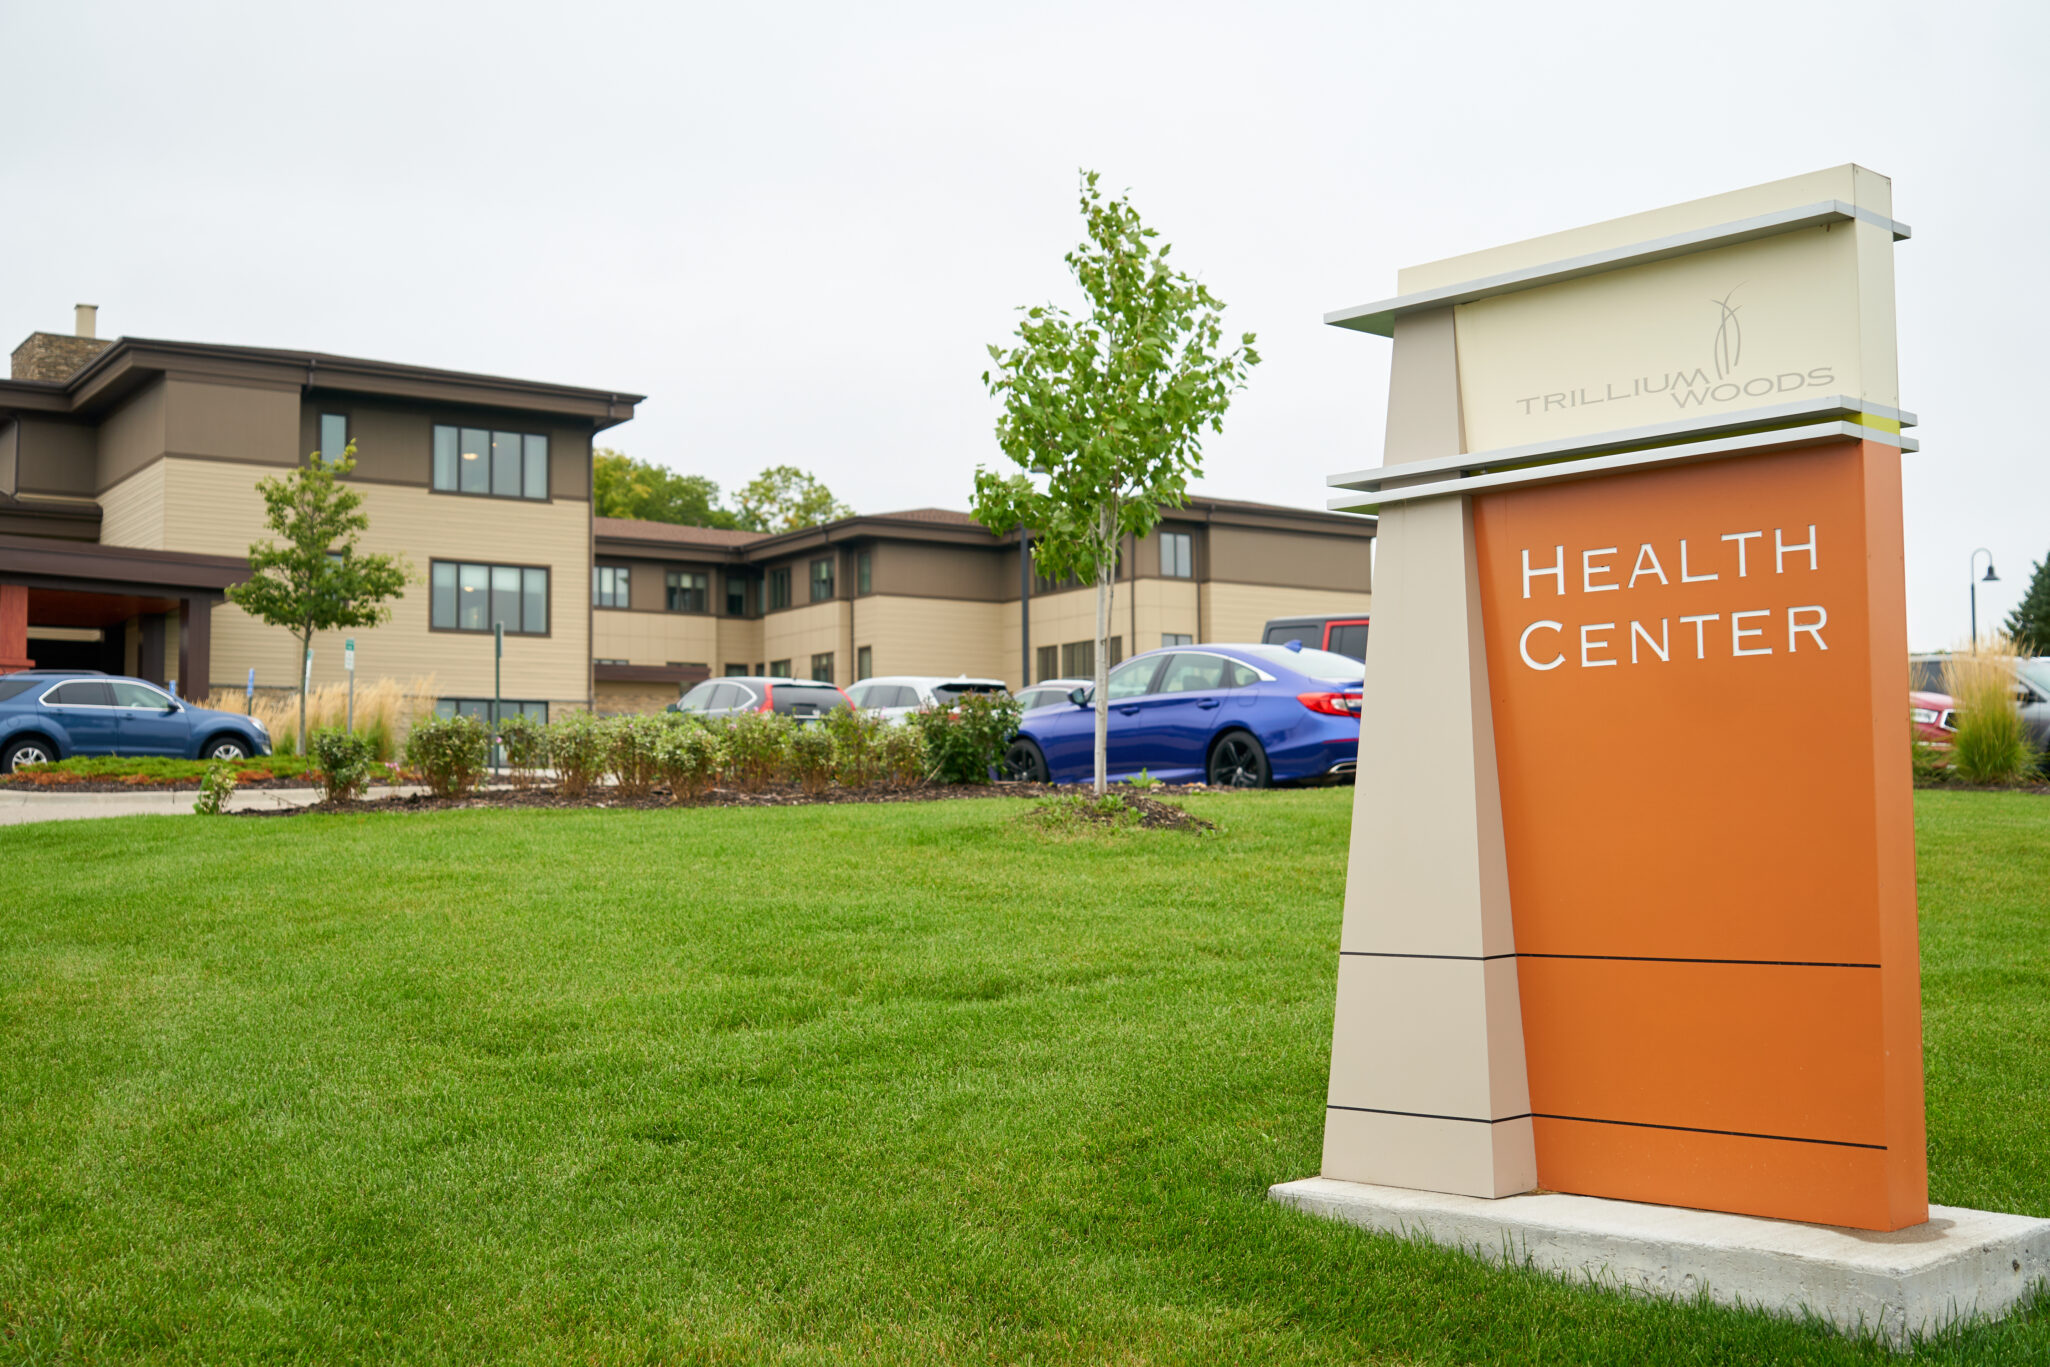 Trillium Woods Health Center Earns Five Stars in All Categories